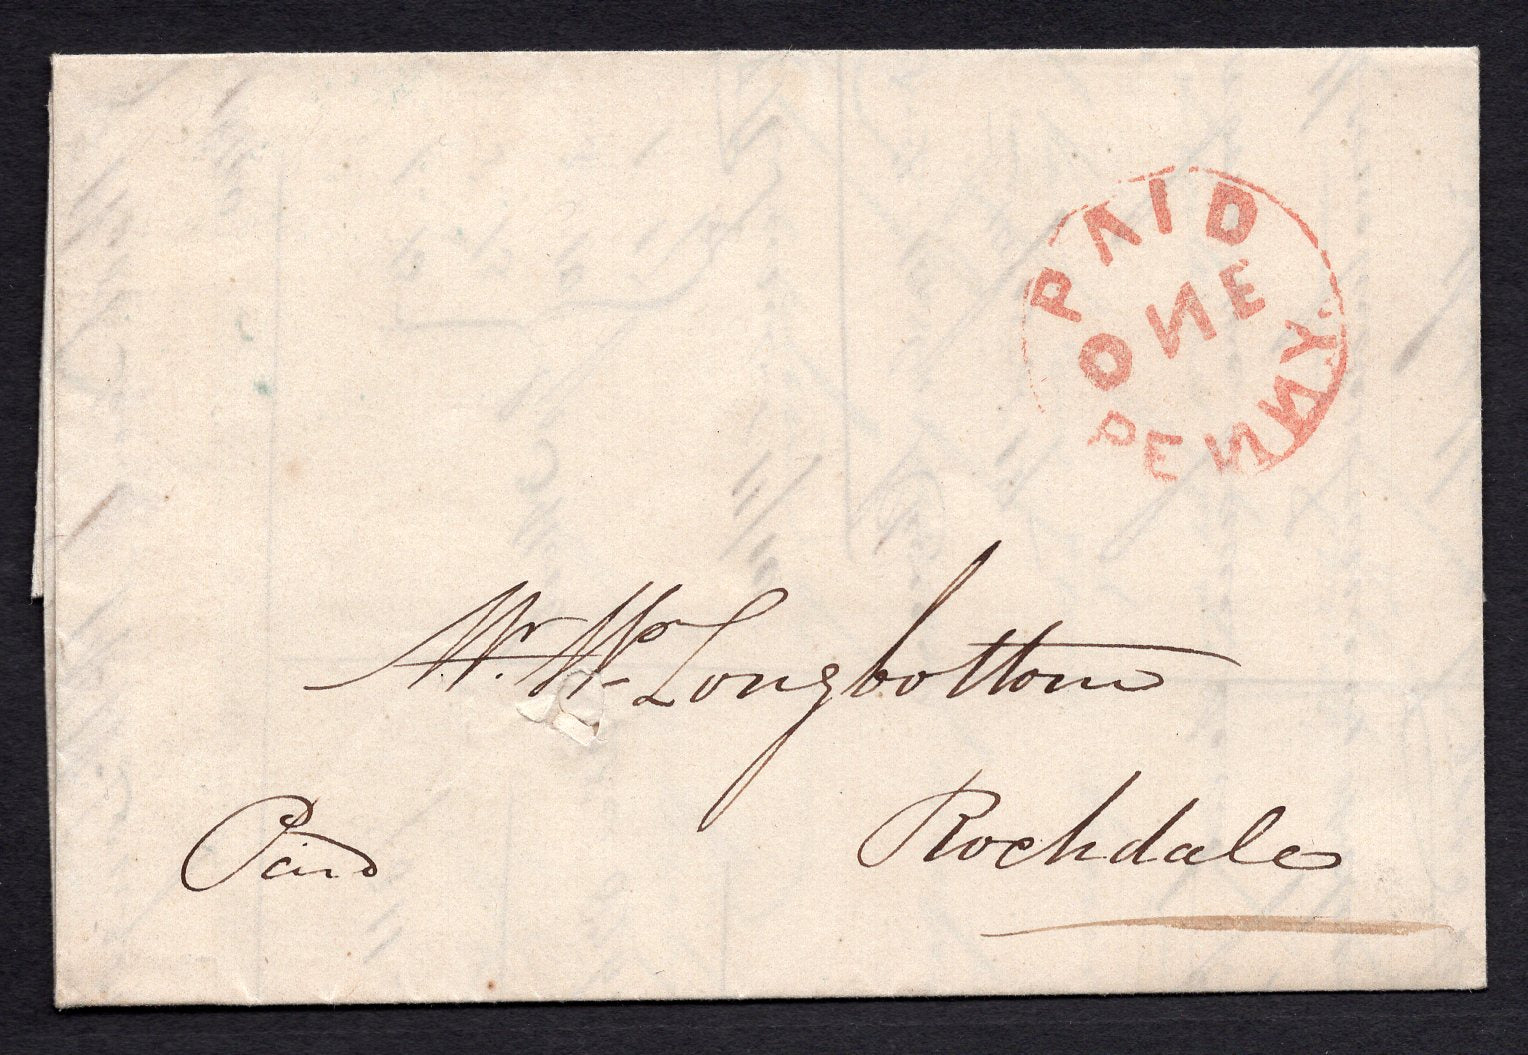 Great Britain Paid One Penny Superb Cancel with Variety all N's Reversed from Bradford UK